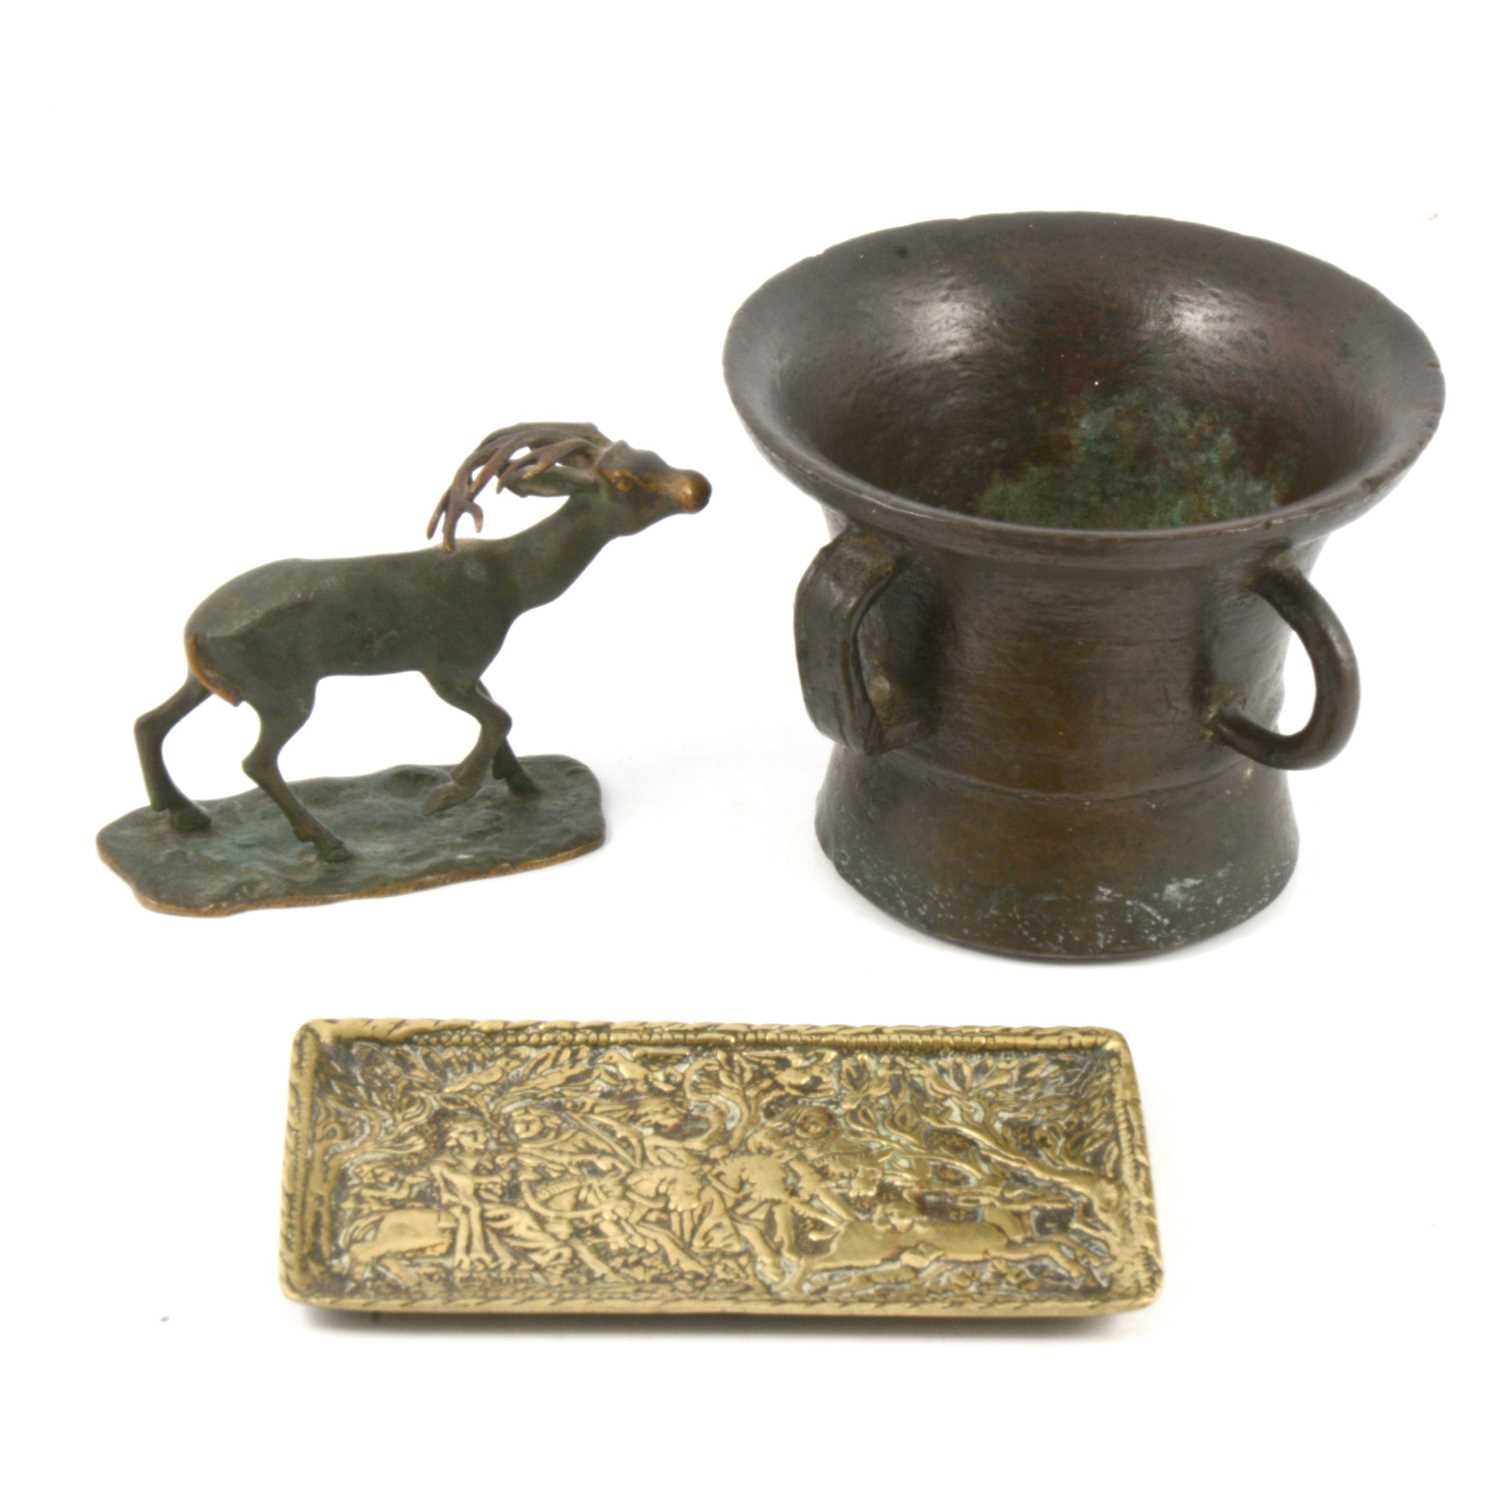 Lot 113 - A small bronze mortar and two other items of metalware